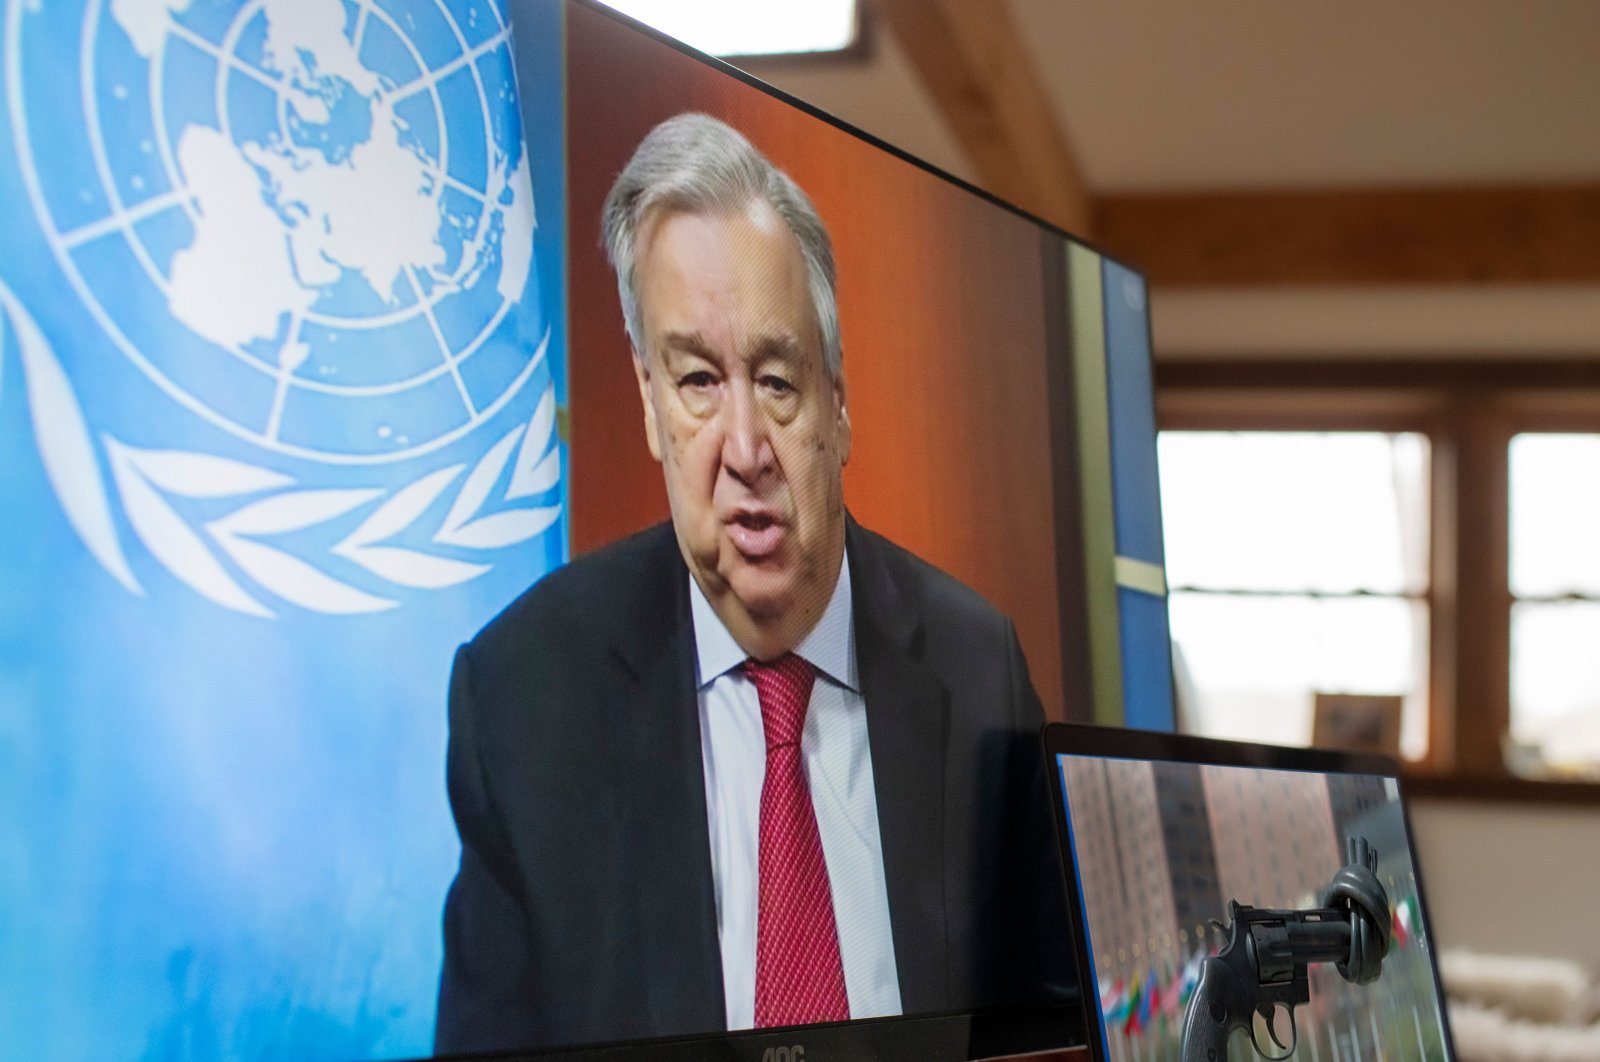 U.N. Secretary-General Antonio Guterres holds a virtual press conference at U.N. headquarters in New York City, Friday, April 3, 2020. (AFP/UN Photo)